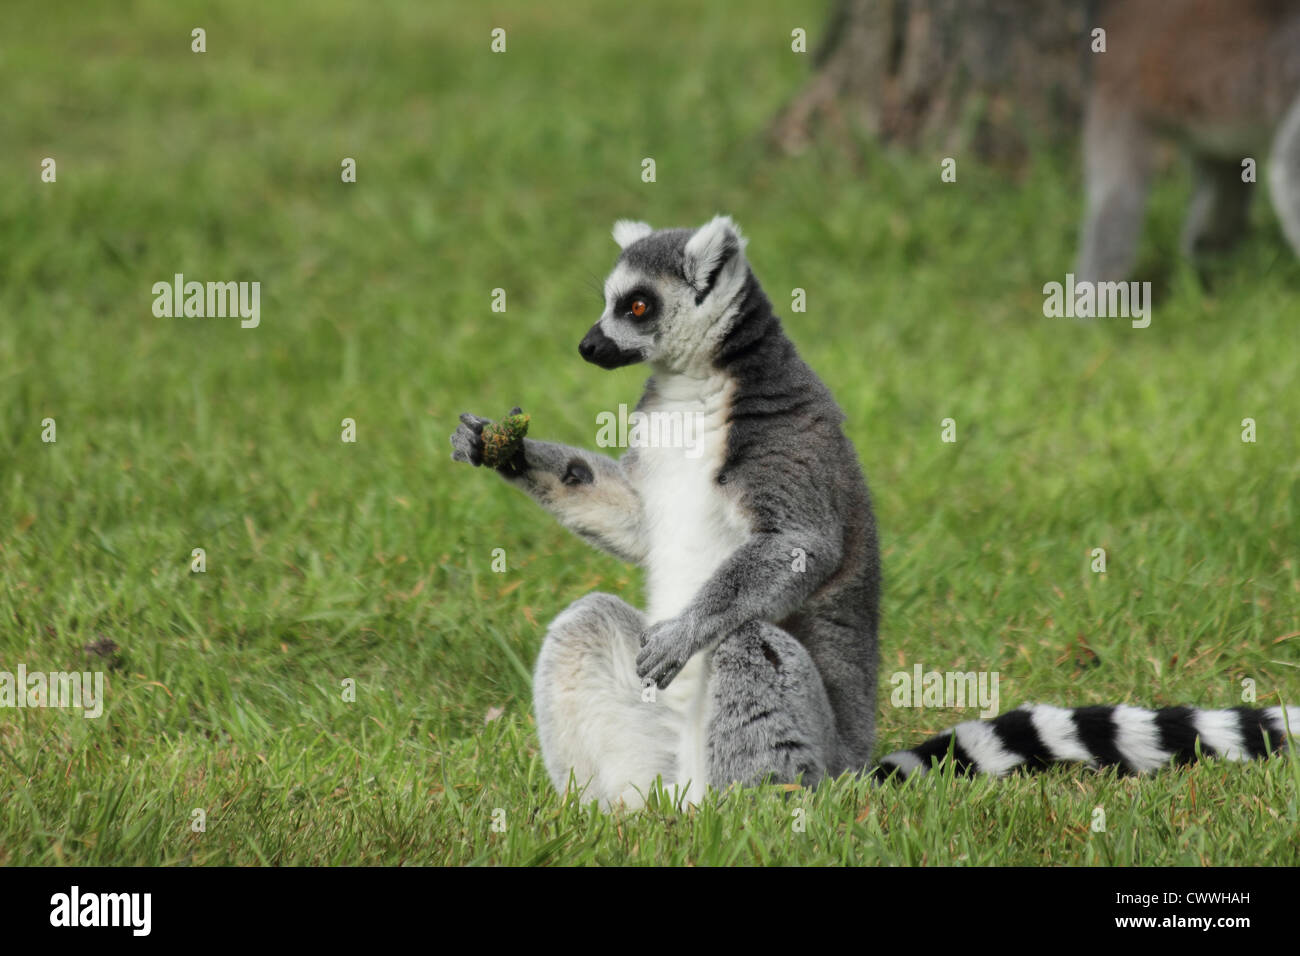 Ring tailed lemur holding a pine cone like it is a grenade Stock Photo